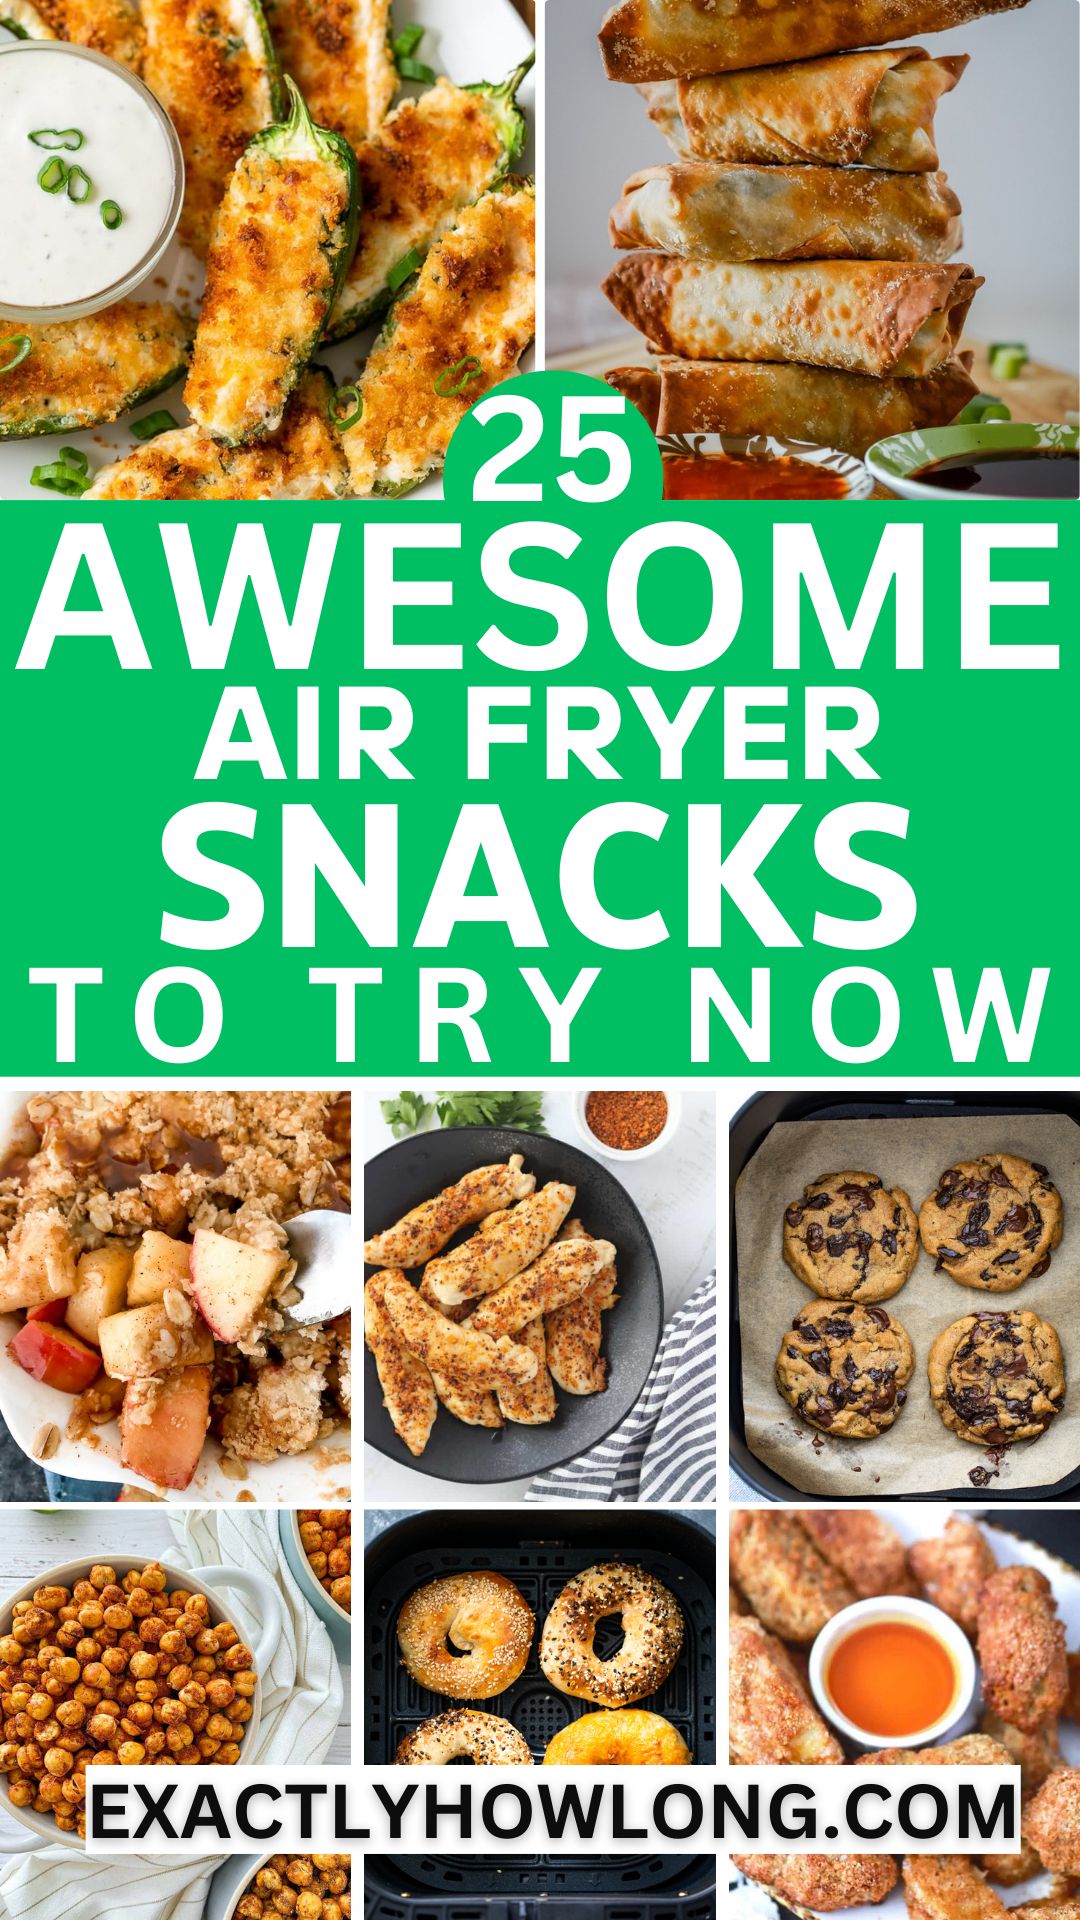 Healthy snacks made in the air fryer that are quick and easy